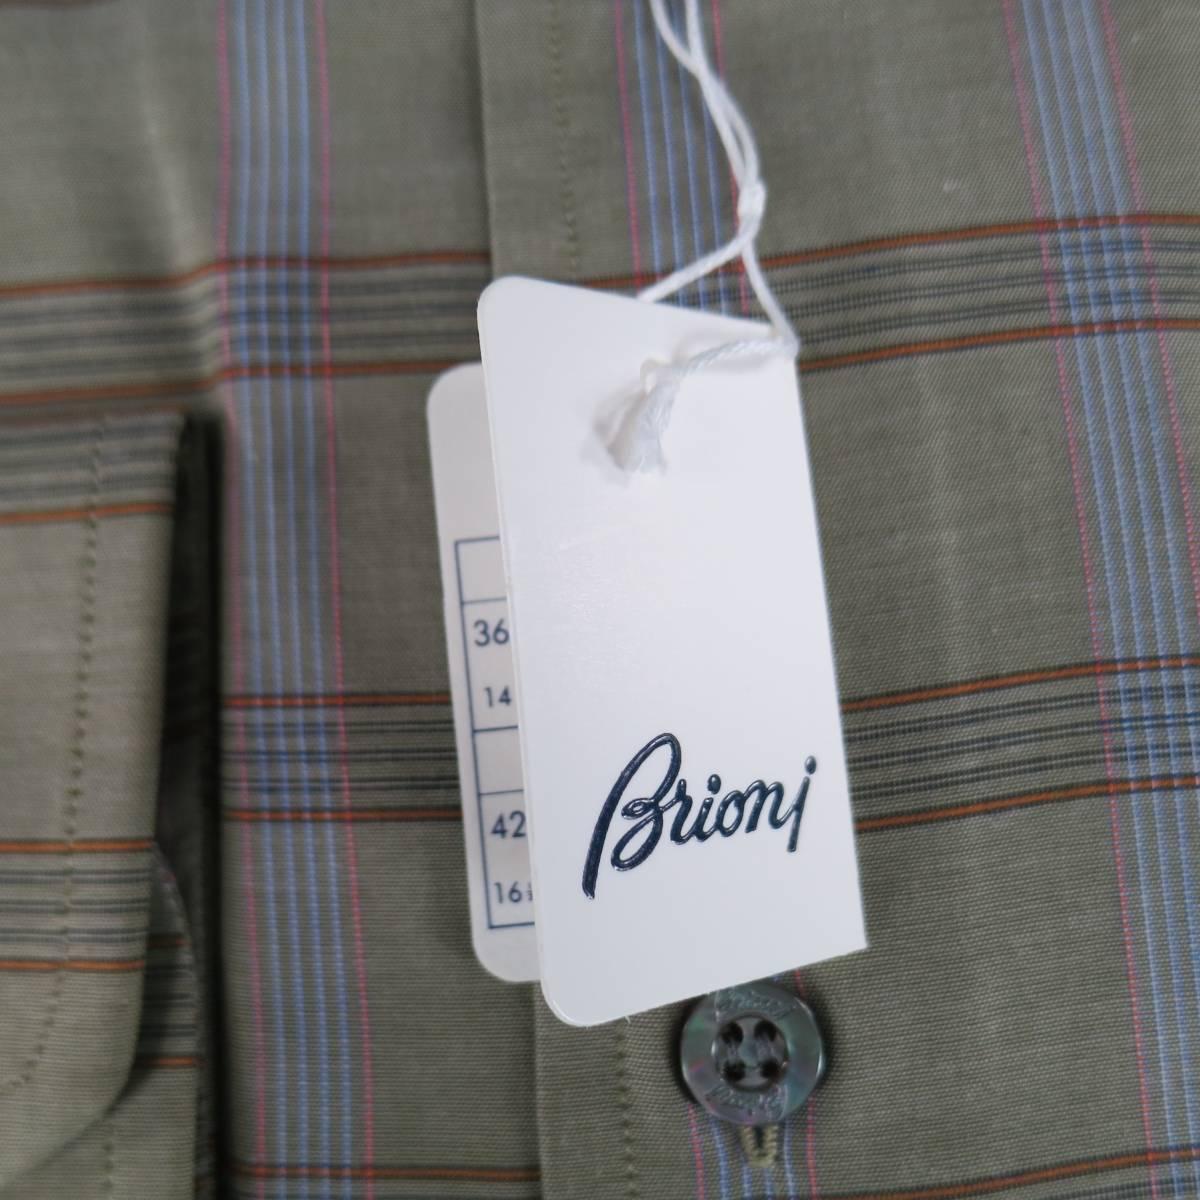 BRIONI Long Sleeve Shirt consists of cotton material in a olive color tone. Designed in a button-up front, patch pocket with double button cuffs. Detailed with a window pane pattern. New with tags. Made in Italy.
 
New Pre-Owned Condition 
Marked